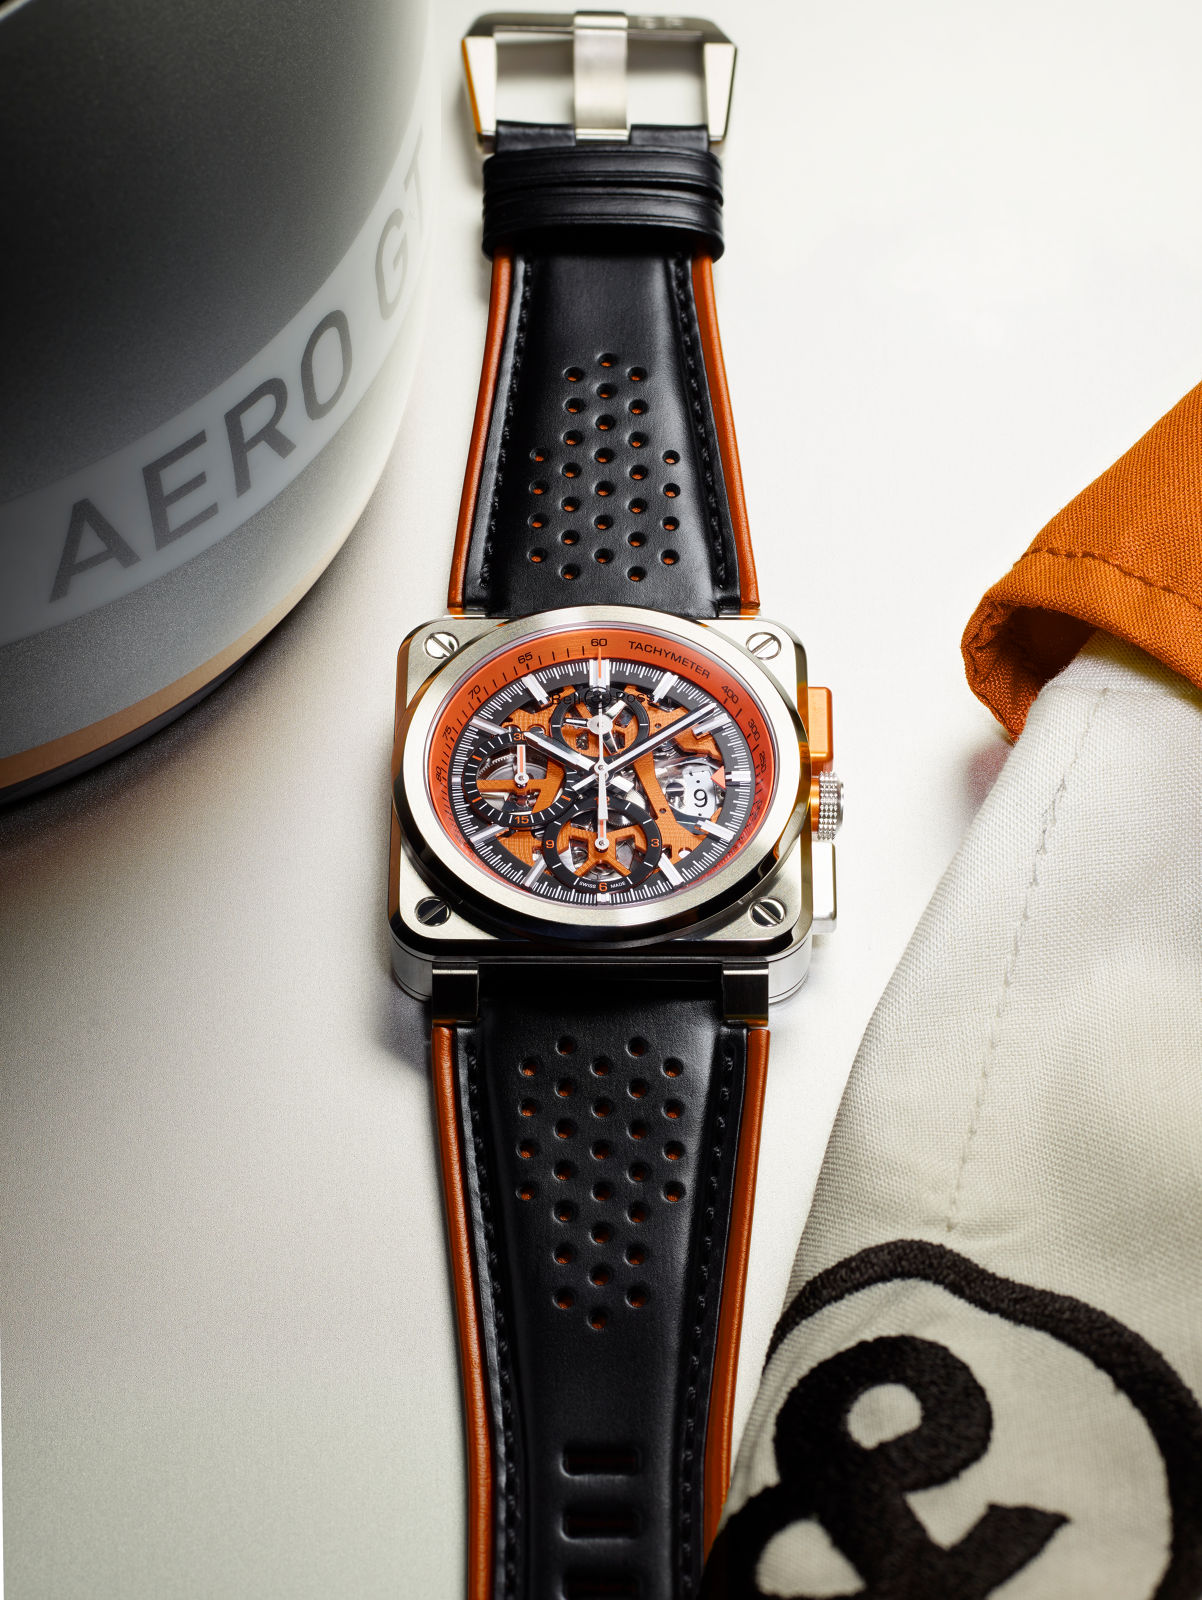 Bell & Ross Limited Edition AeroGT Orange Timepiece